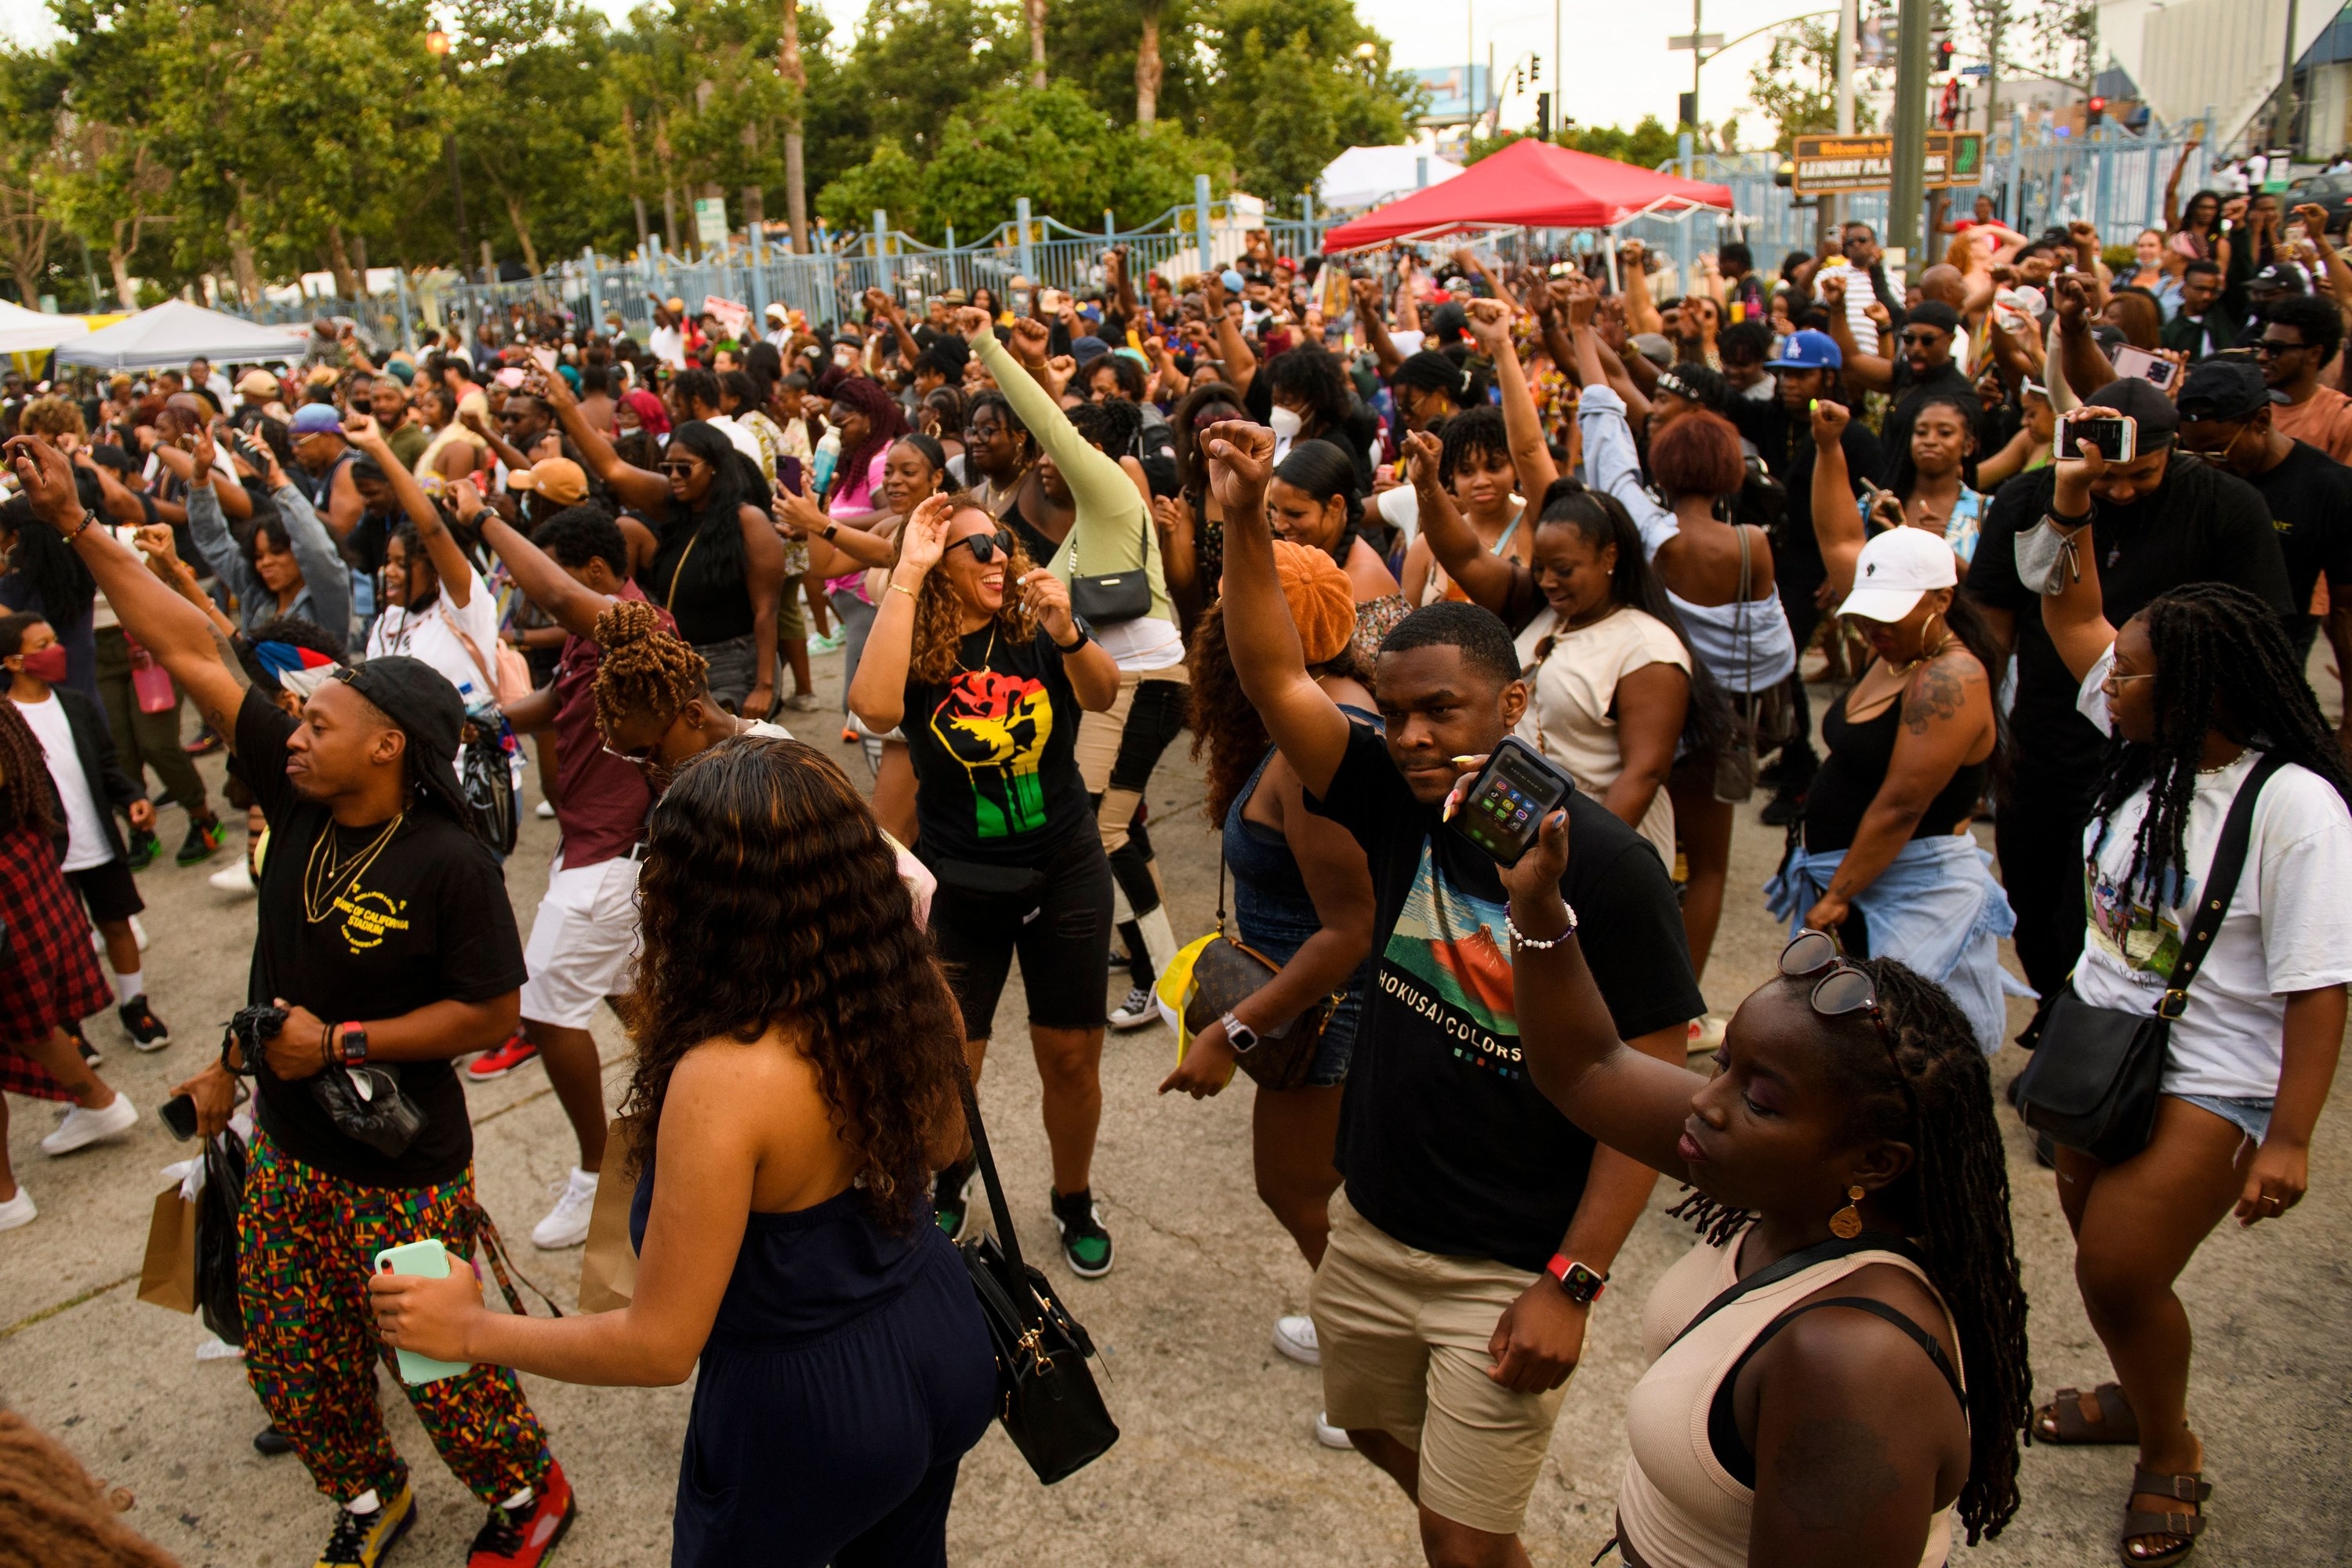 a group raises their fists for Black power